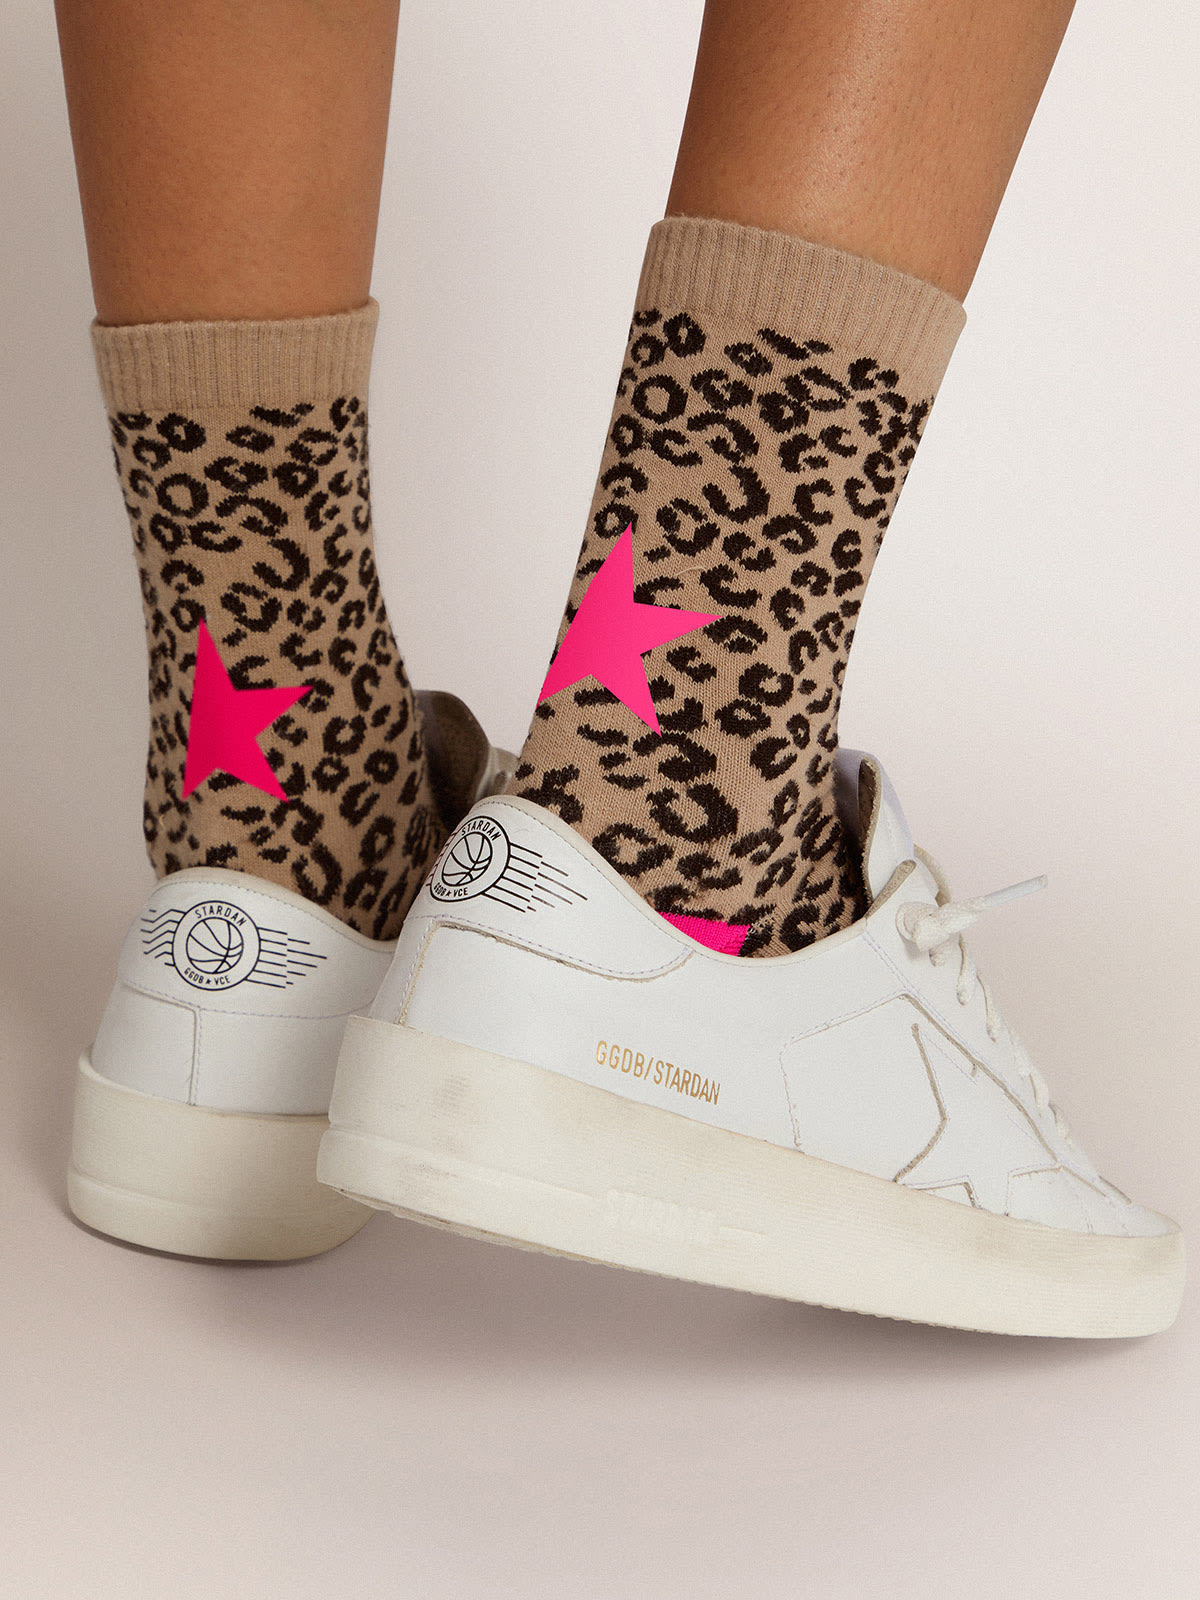 Animal-print socks with sand-colored base and fuchsia details | Golden Goose